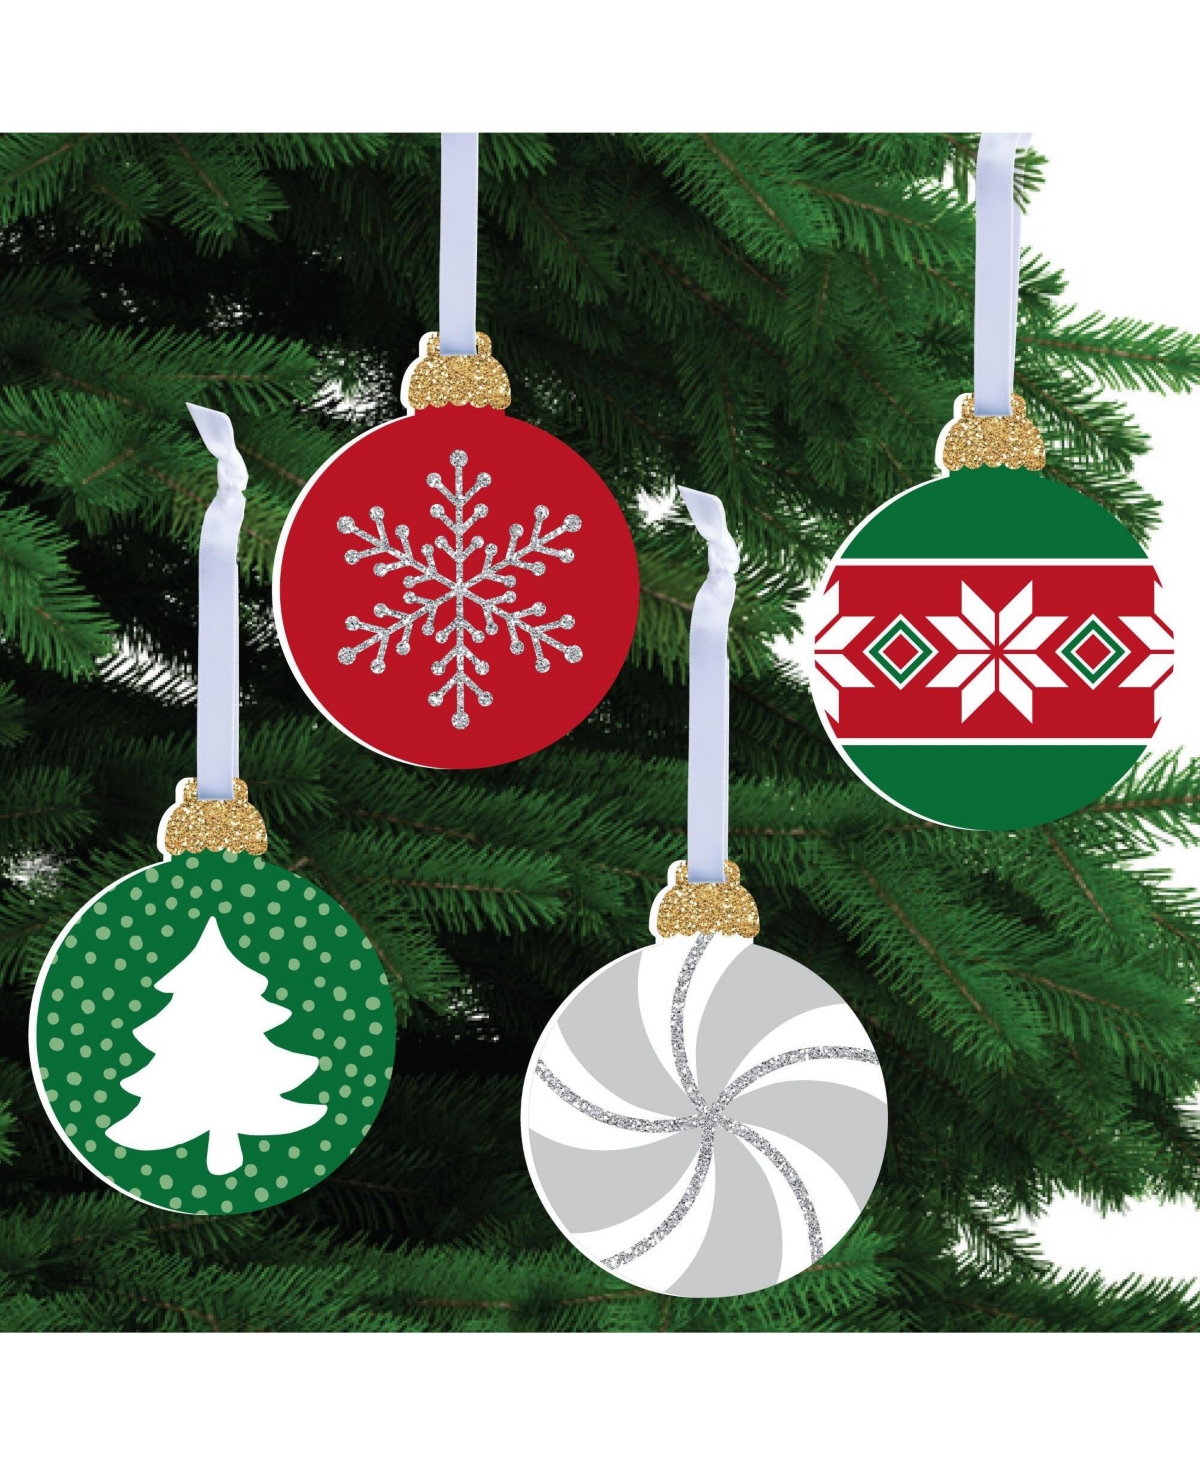 Ornaments - Holiday Party Decorations - Christmas Tree Ornaments - Set of 12